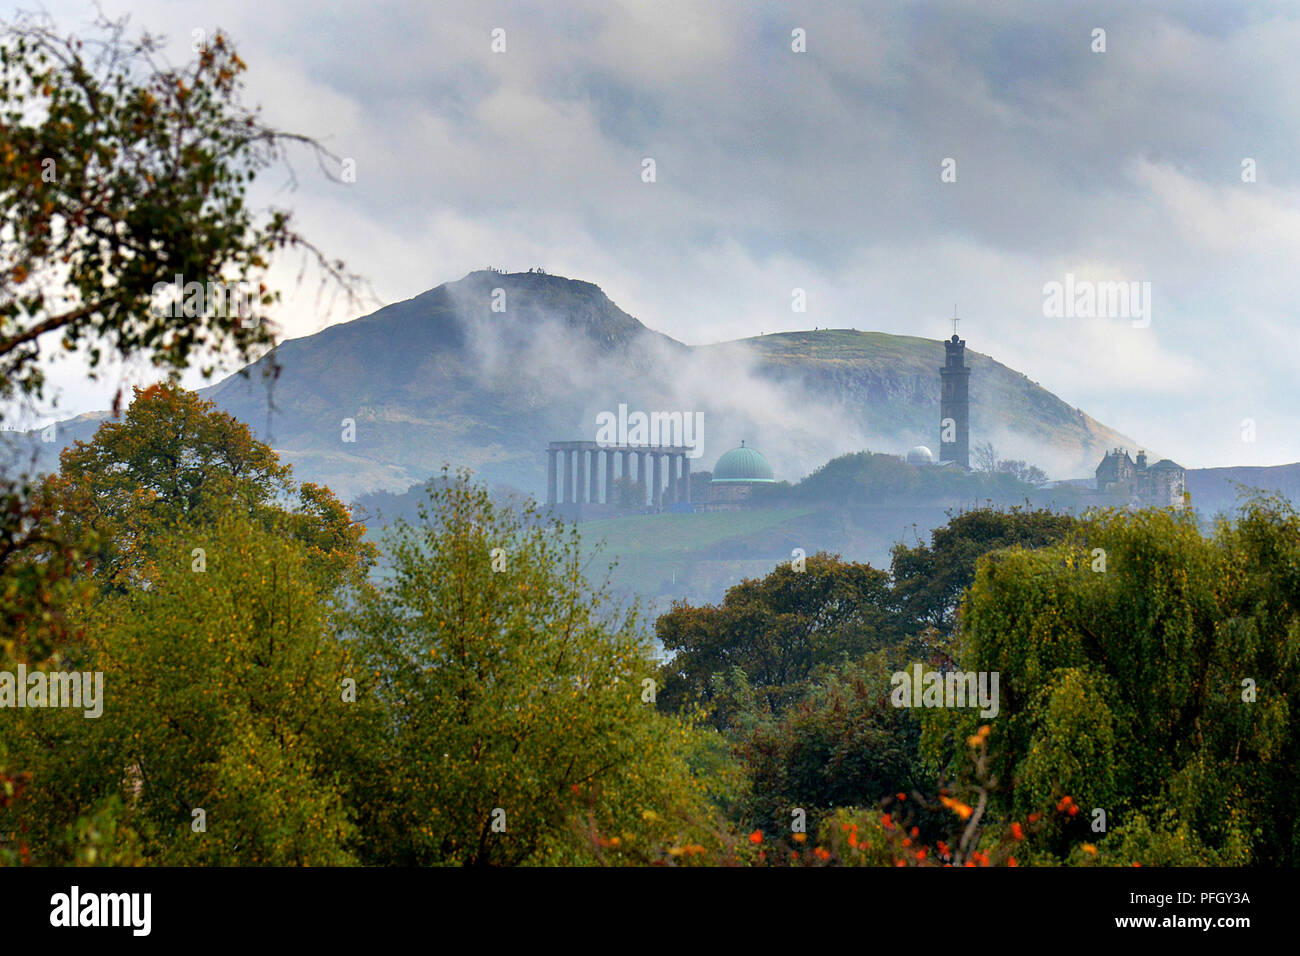 JON SAVAGE PHOTOGRAPHY 07762 580971  19 TH OCTOBER 2013  AUTUMNAL MIST HOVERS OVER ARTHURS SEAT AND CALTON HILL TODAY IN EDINBURGH, SCOTLAND Stock Photo